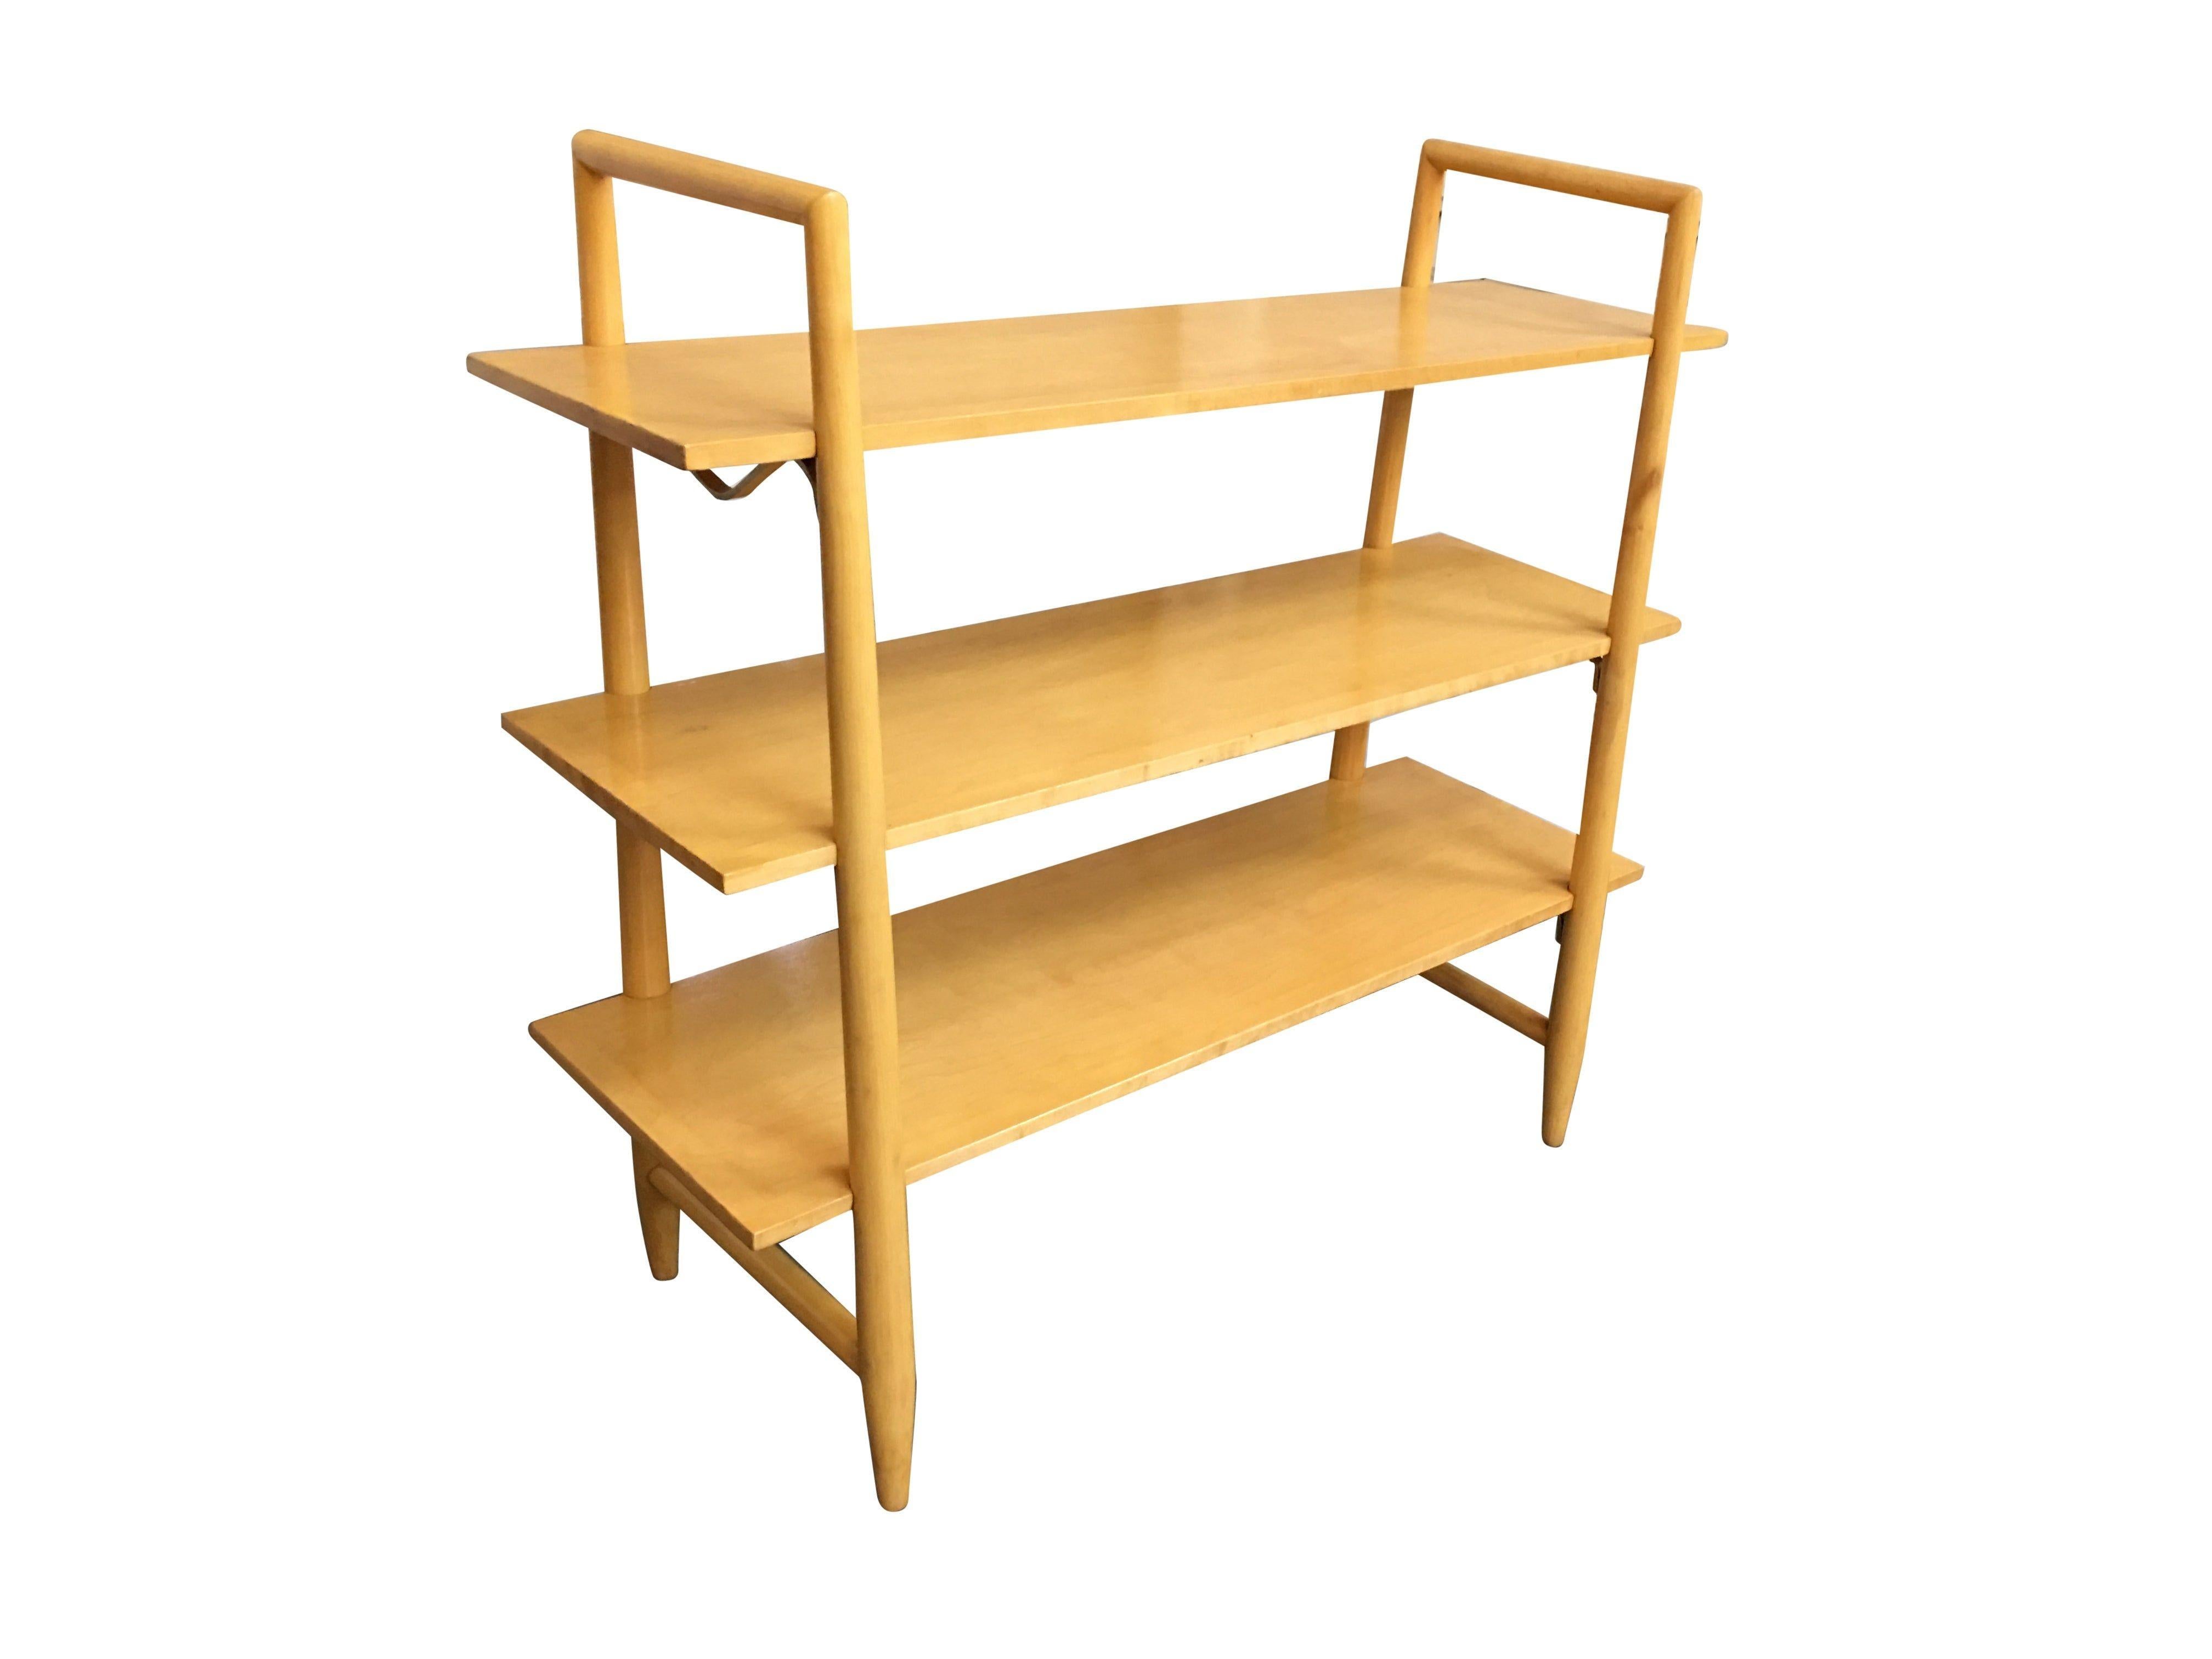 Swedish-made blonde Mid-Century Modern bookshelf pair with three floating shelves each designed by Edmond Spence for Walpole. Attractive joinery and a very usable size with great detail. The turned supports are inset to the shelves and there are